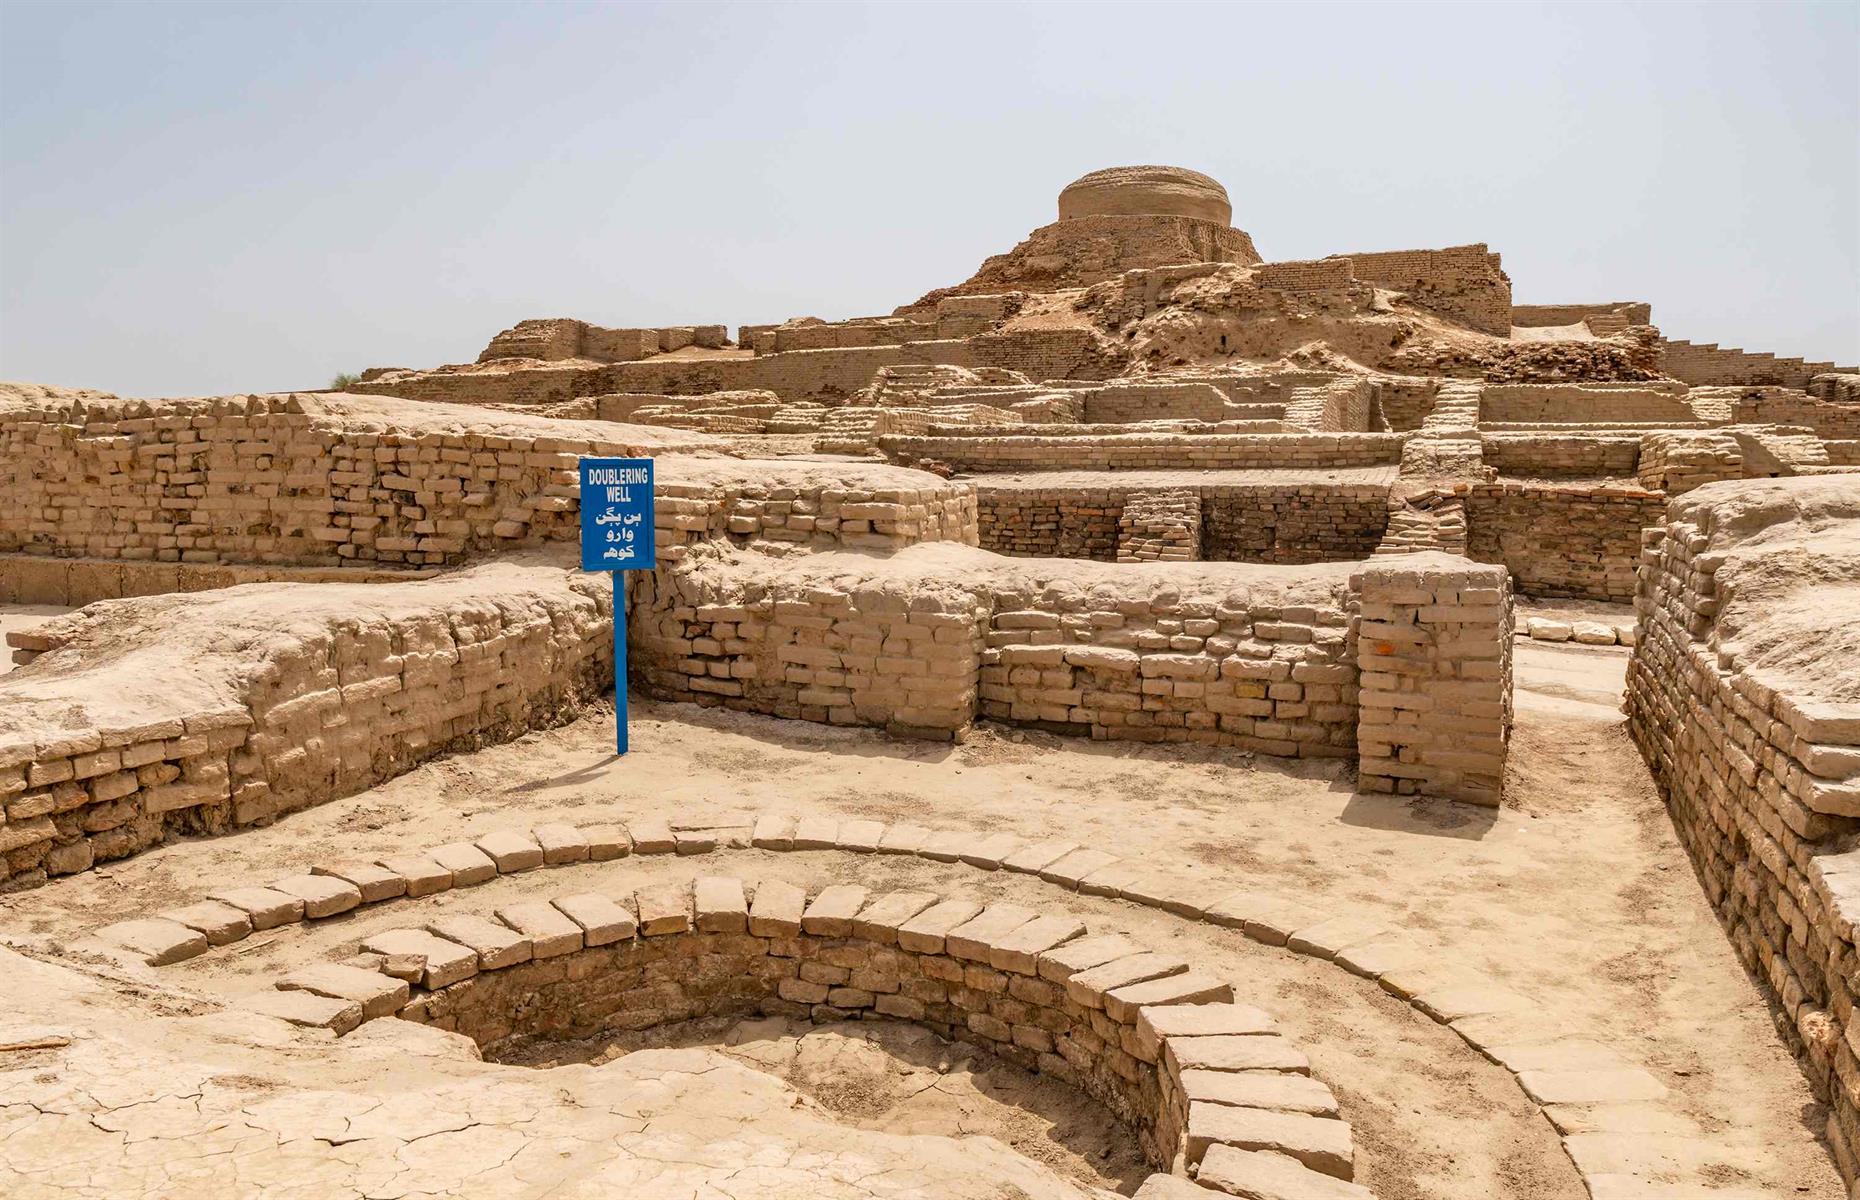 <p>One of the world's first major cities – contemporaneous with Mesopotamia and ancient Egypt – 4,500-year-old Mohenjo-daro is the jewel in Pakistan's archaeological crown, but devastating floods caused by an unprecedented 2022 monsoon season dealt the site dire damage. Walls that stood for millennia were swept away by the monsoon rain, which killed hundreds and left around a third of the country underwater, while much of the rest of the city suffered severe erosion. </p>